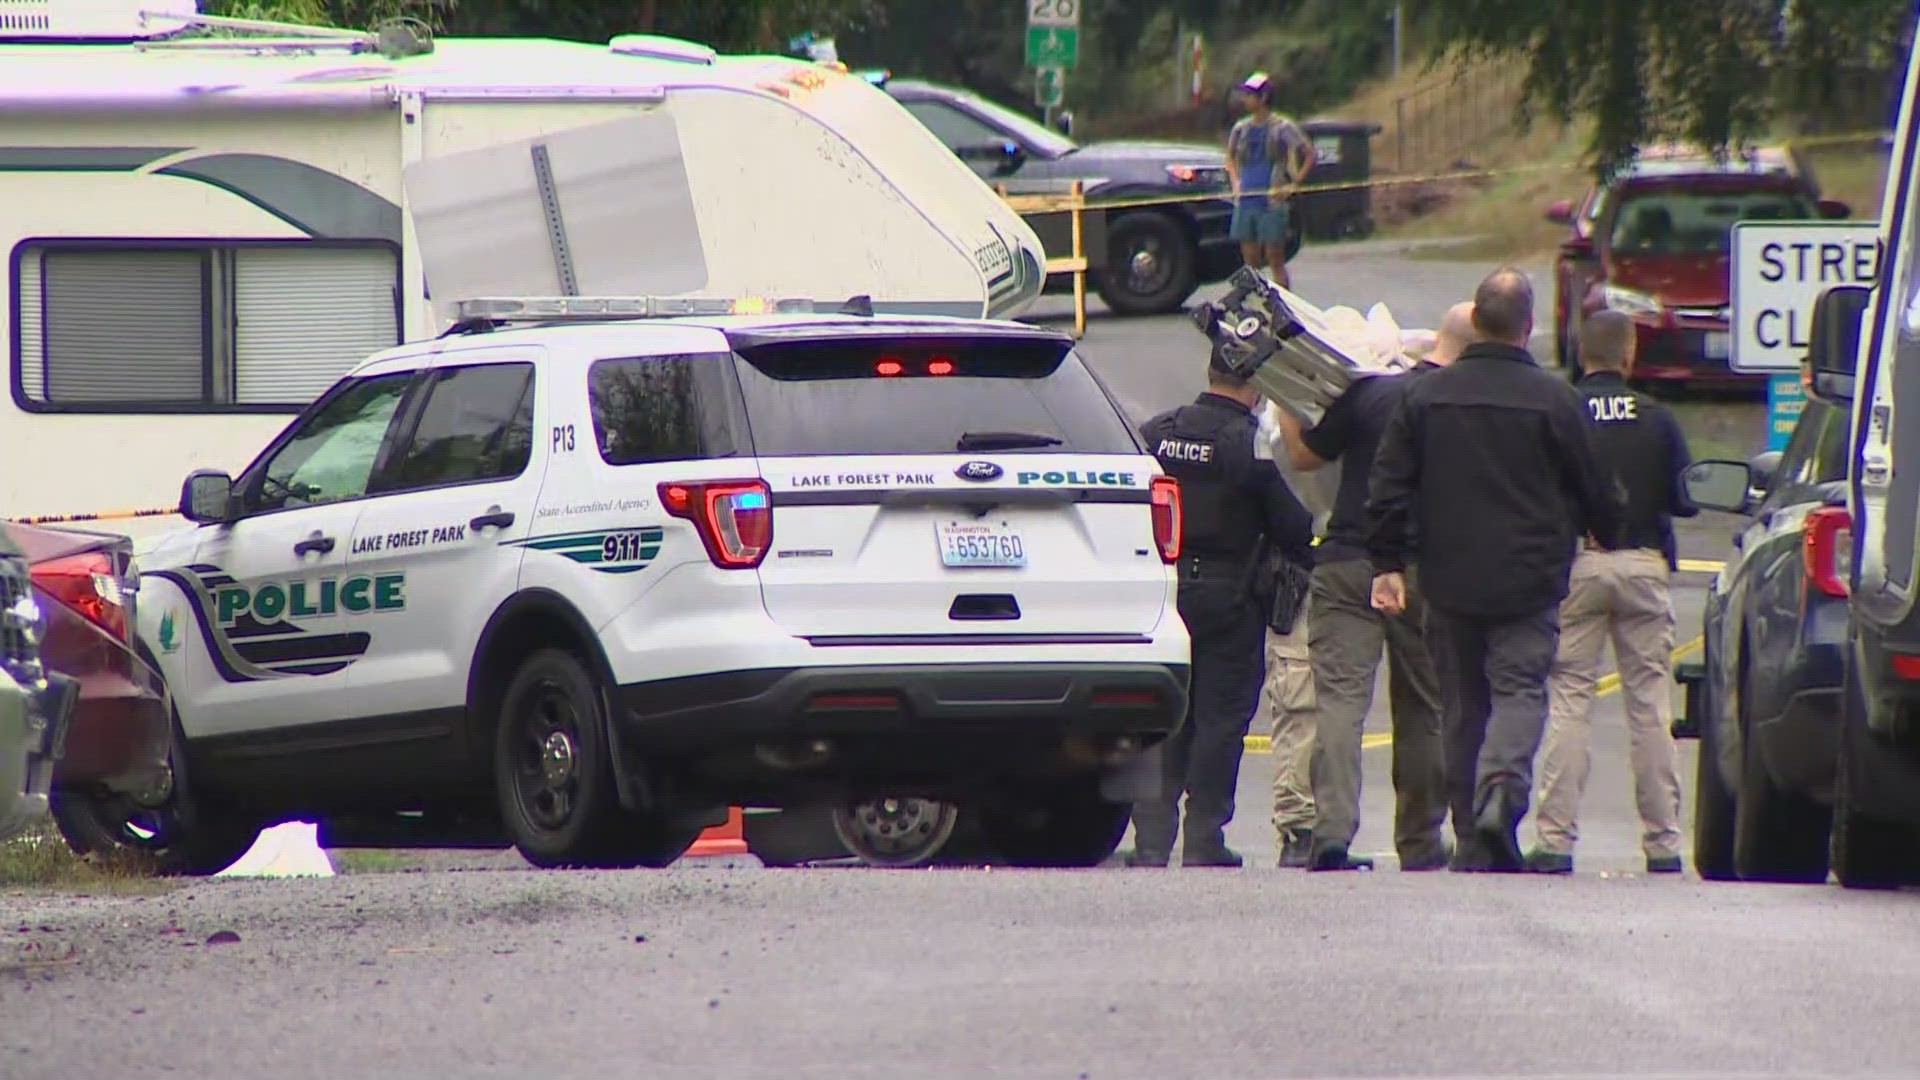 One person was found shot inside an RV in Seattle's Lake City neighborhood after police were led there from a collision in nearby Lake Forest Park